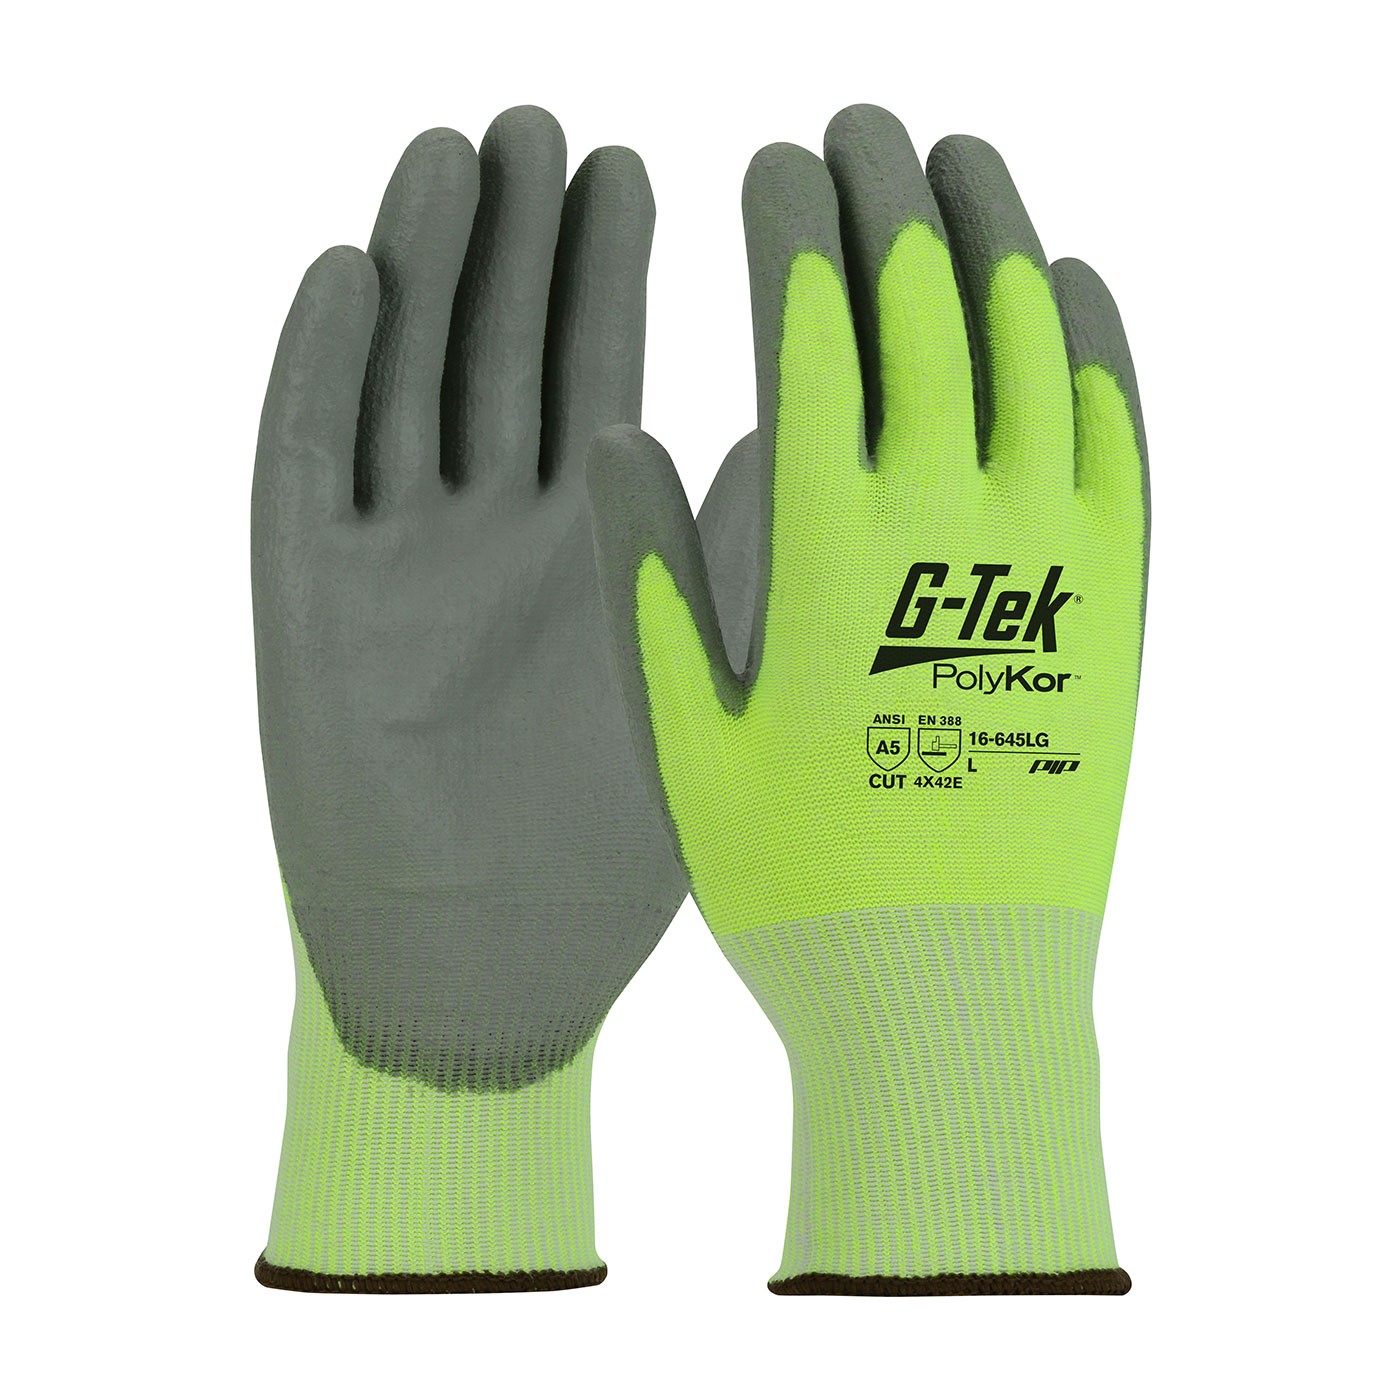  G-Tek® PolyKor® Seamless Knit PolyKor® Blended Glove with Polyurethane Coated Smooth Grip on Palm & Fingers  (#16-645LG)